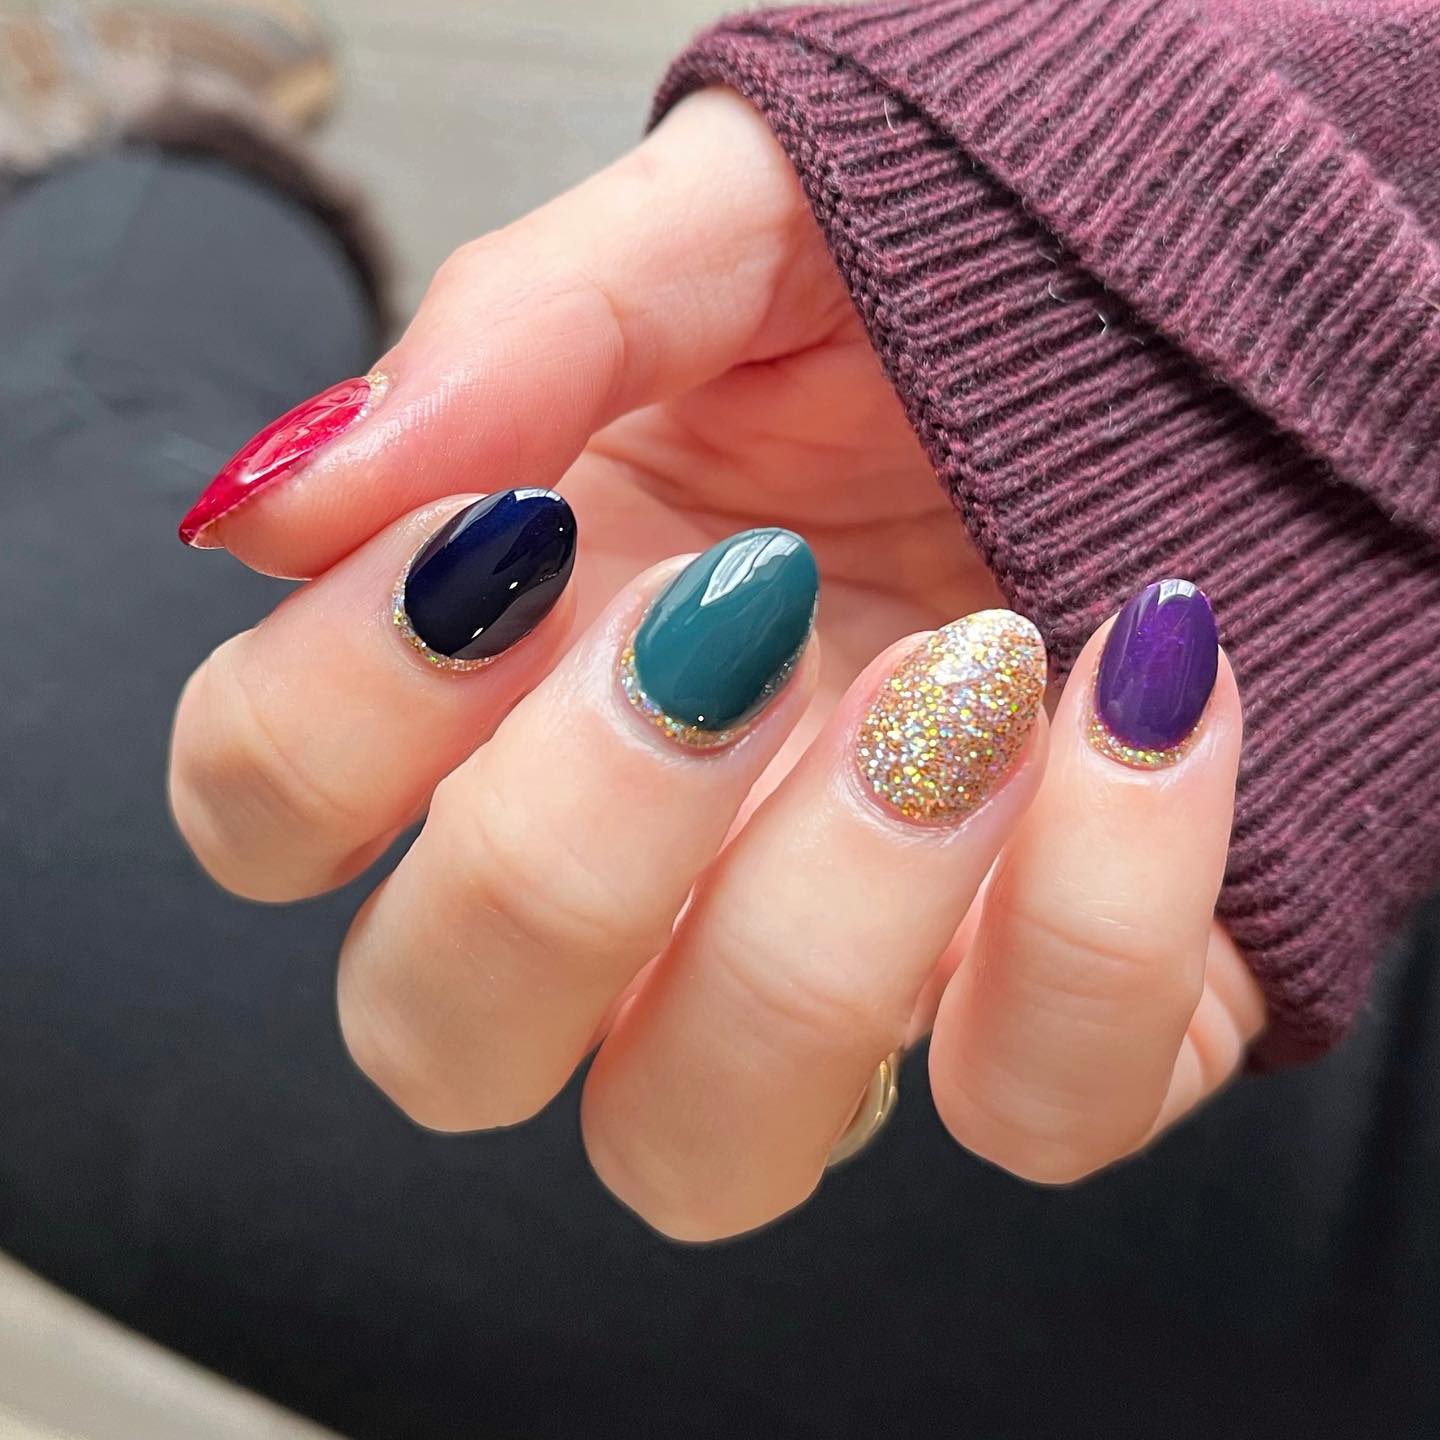 Colorful gel nails look amazing with an oval manicure. Plus, these nails are a great way to show off your individuality. Whether you want to go bold and bright or soft and subtle, there's a color for you.